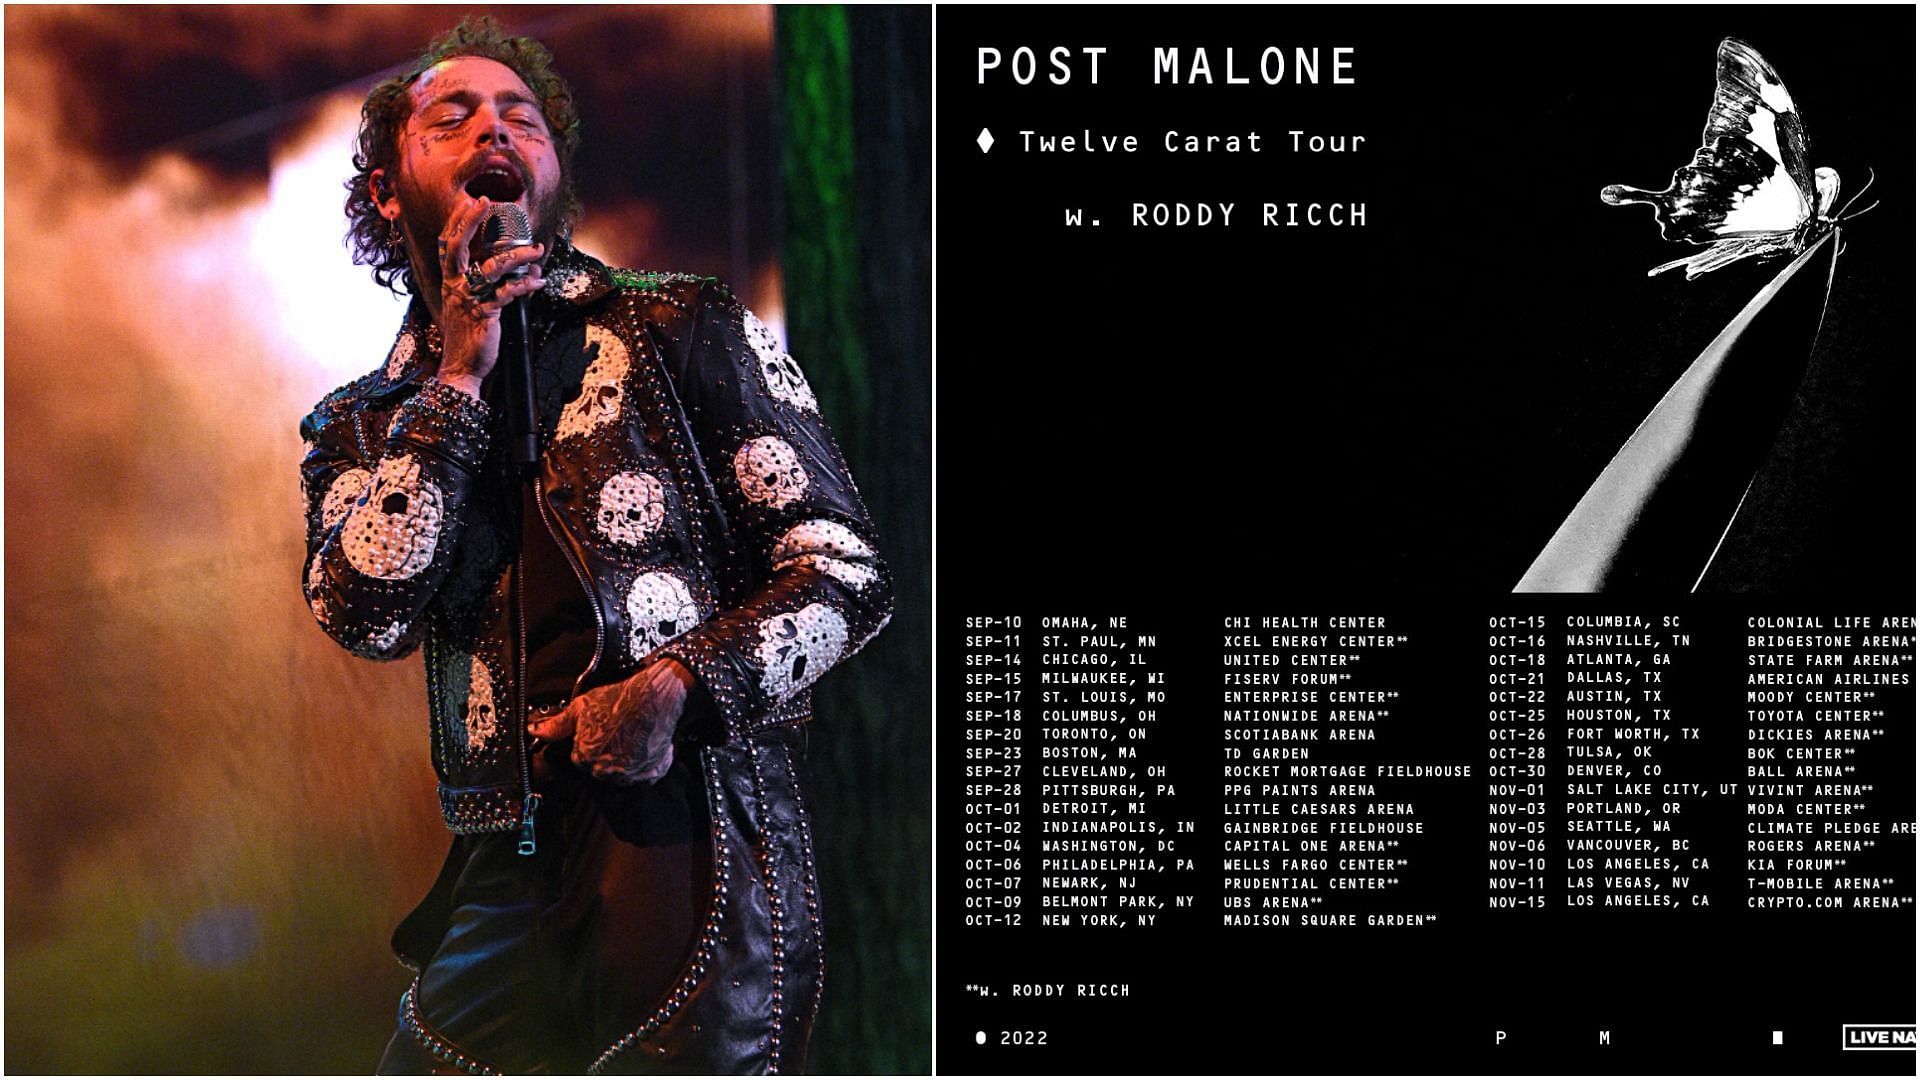 Post Malone Twelve Carat Tour 2022: Tickets, presale, dates and more